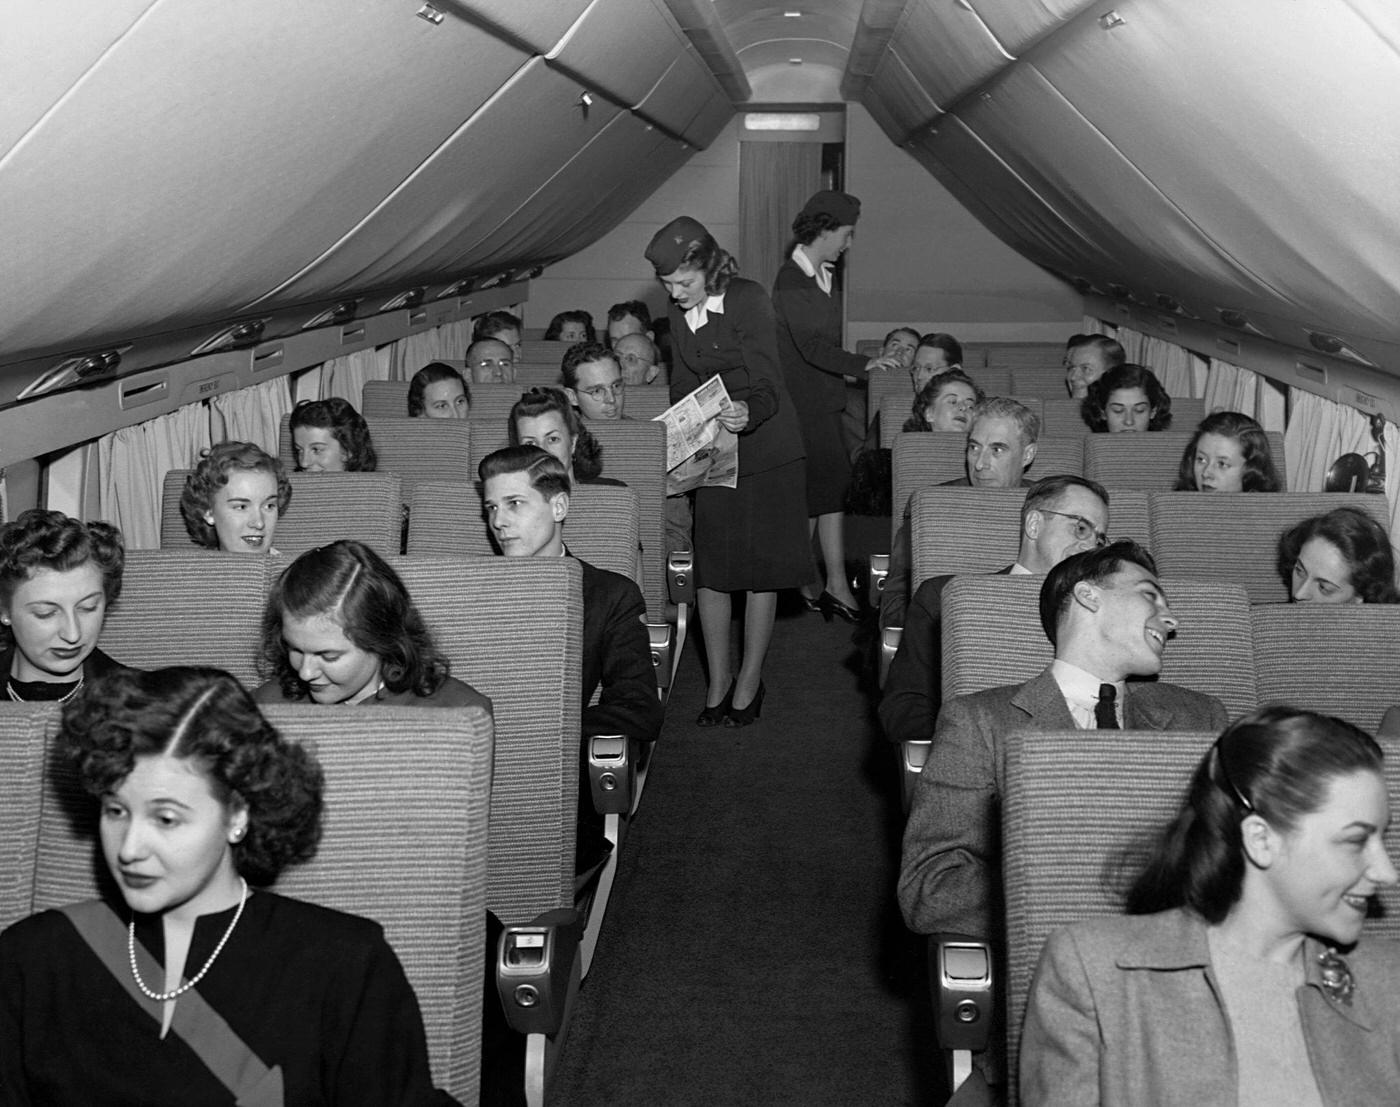 The interior of a Douglas DC-6 passenger airliner is shown, featuring passengers and flight attendants on a flight.